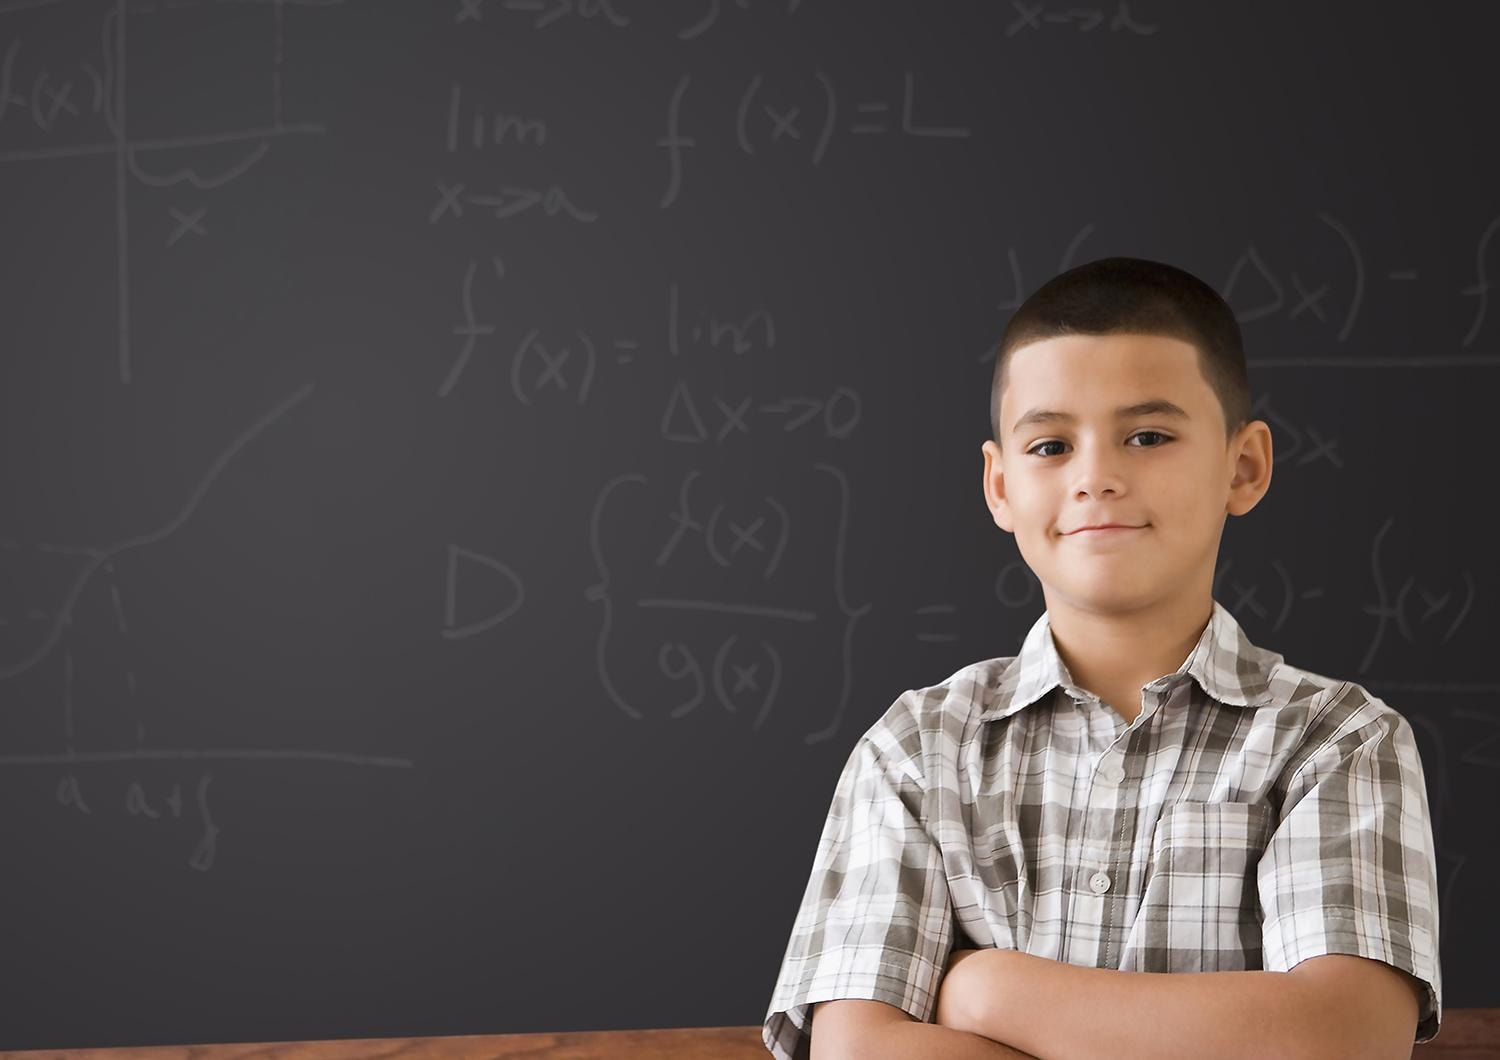 Young boy standing in front of chalkboard